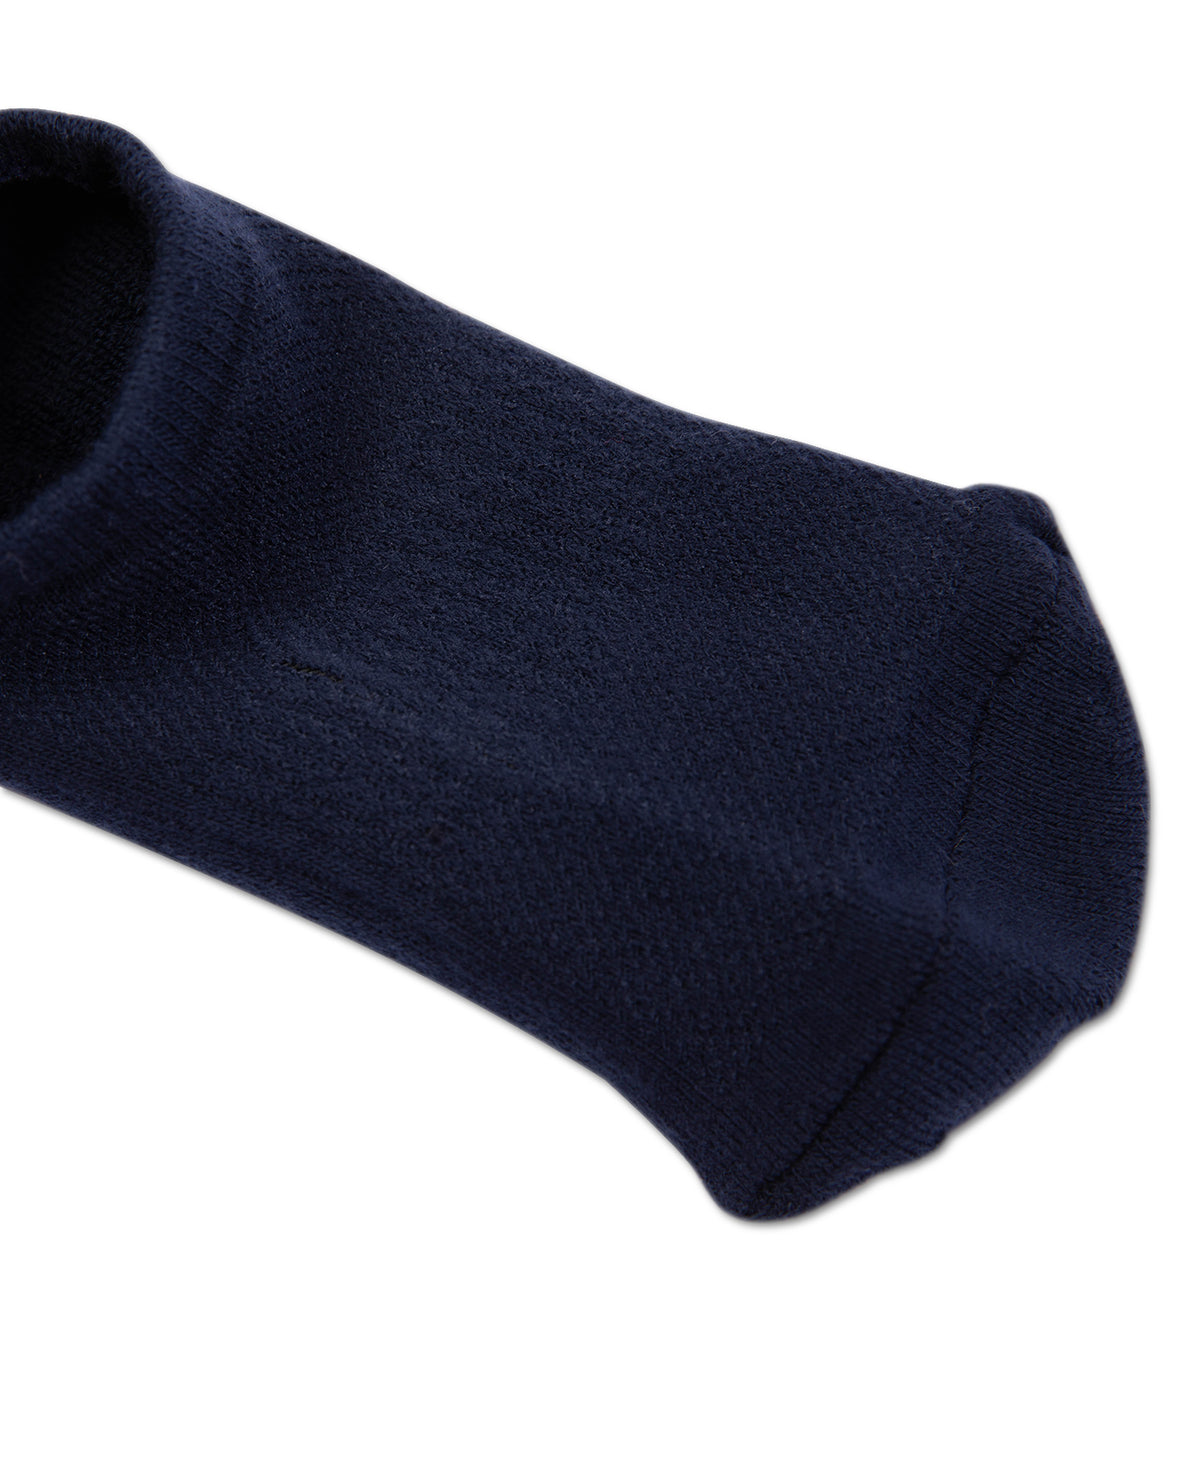 Colored Cotton No Show Socks - Navy